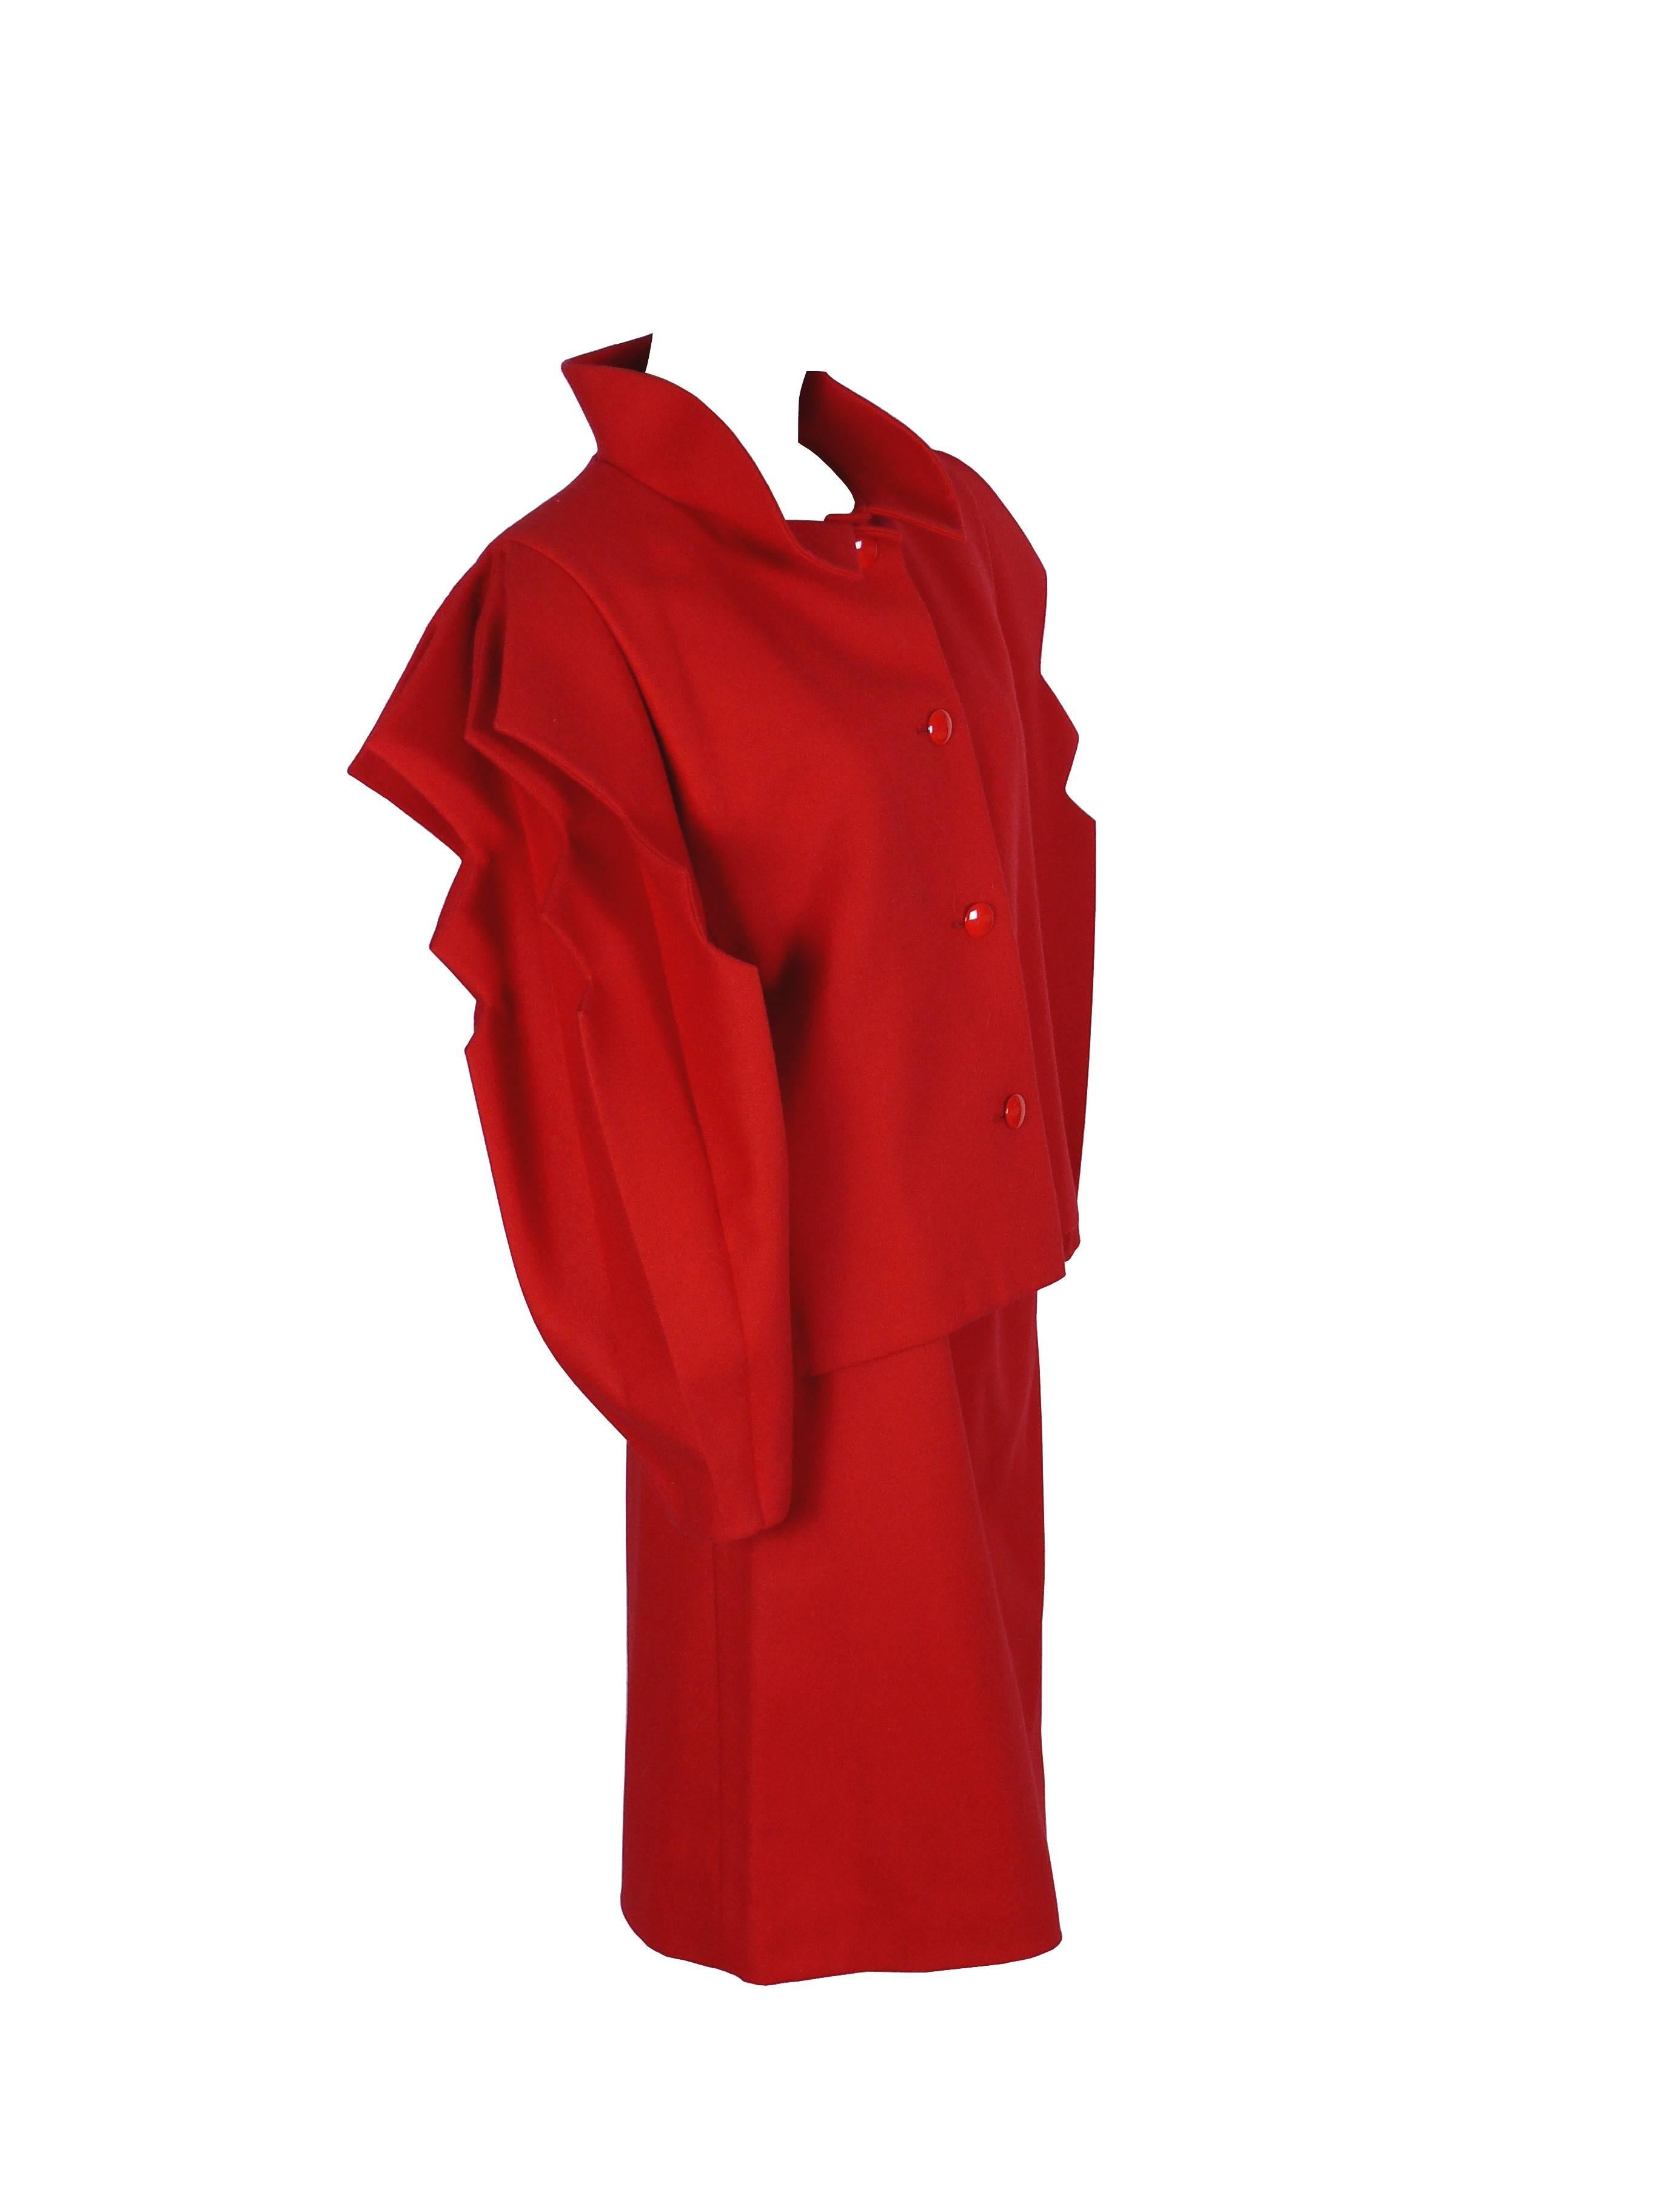 PIERRE CARDIN Prestige intage red skirt suit.

Blazer has stunning cut-out accordion sleeves, rigid collar turned up and button fastening.

Straight skirt with zip closure.

Both jacket and skirt are fully lined.

Label reads PIERRE CARDIN